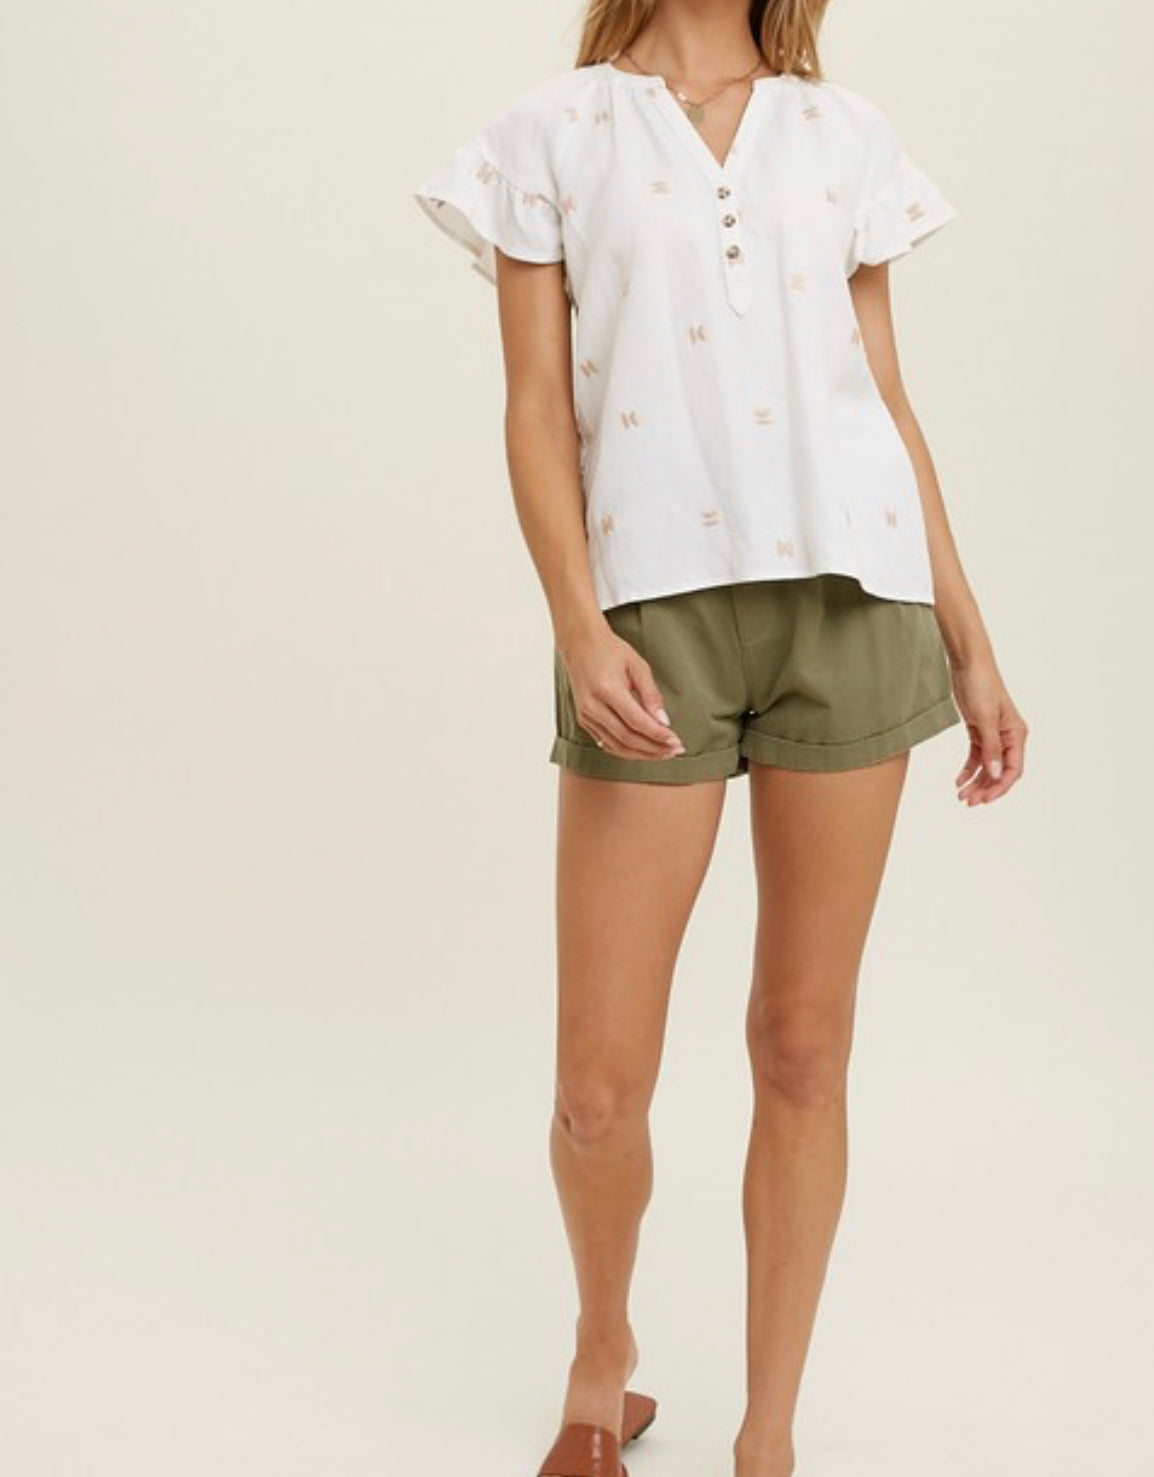 little miss bow blouse WAS $52